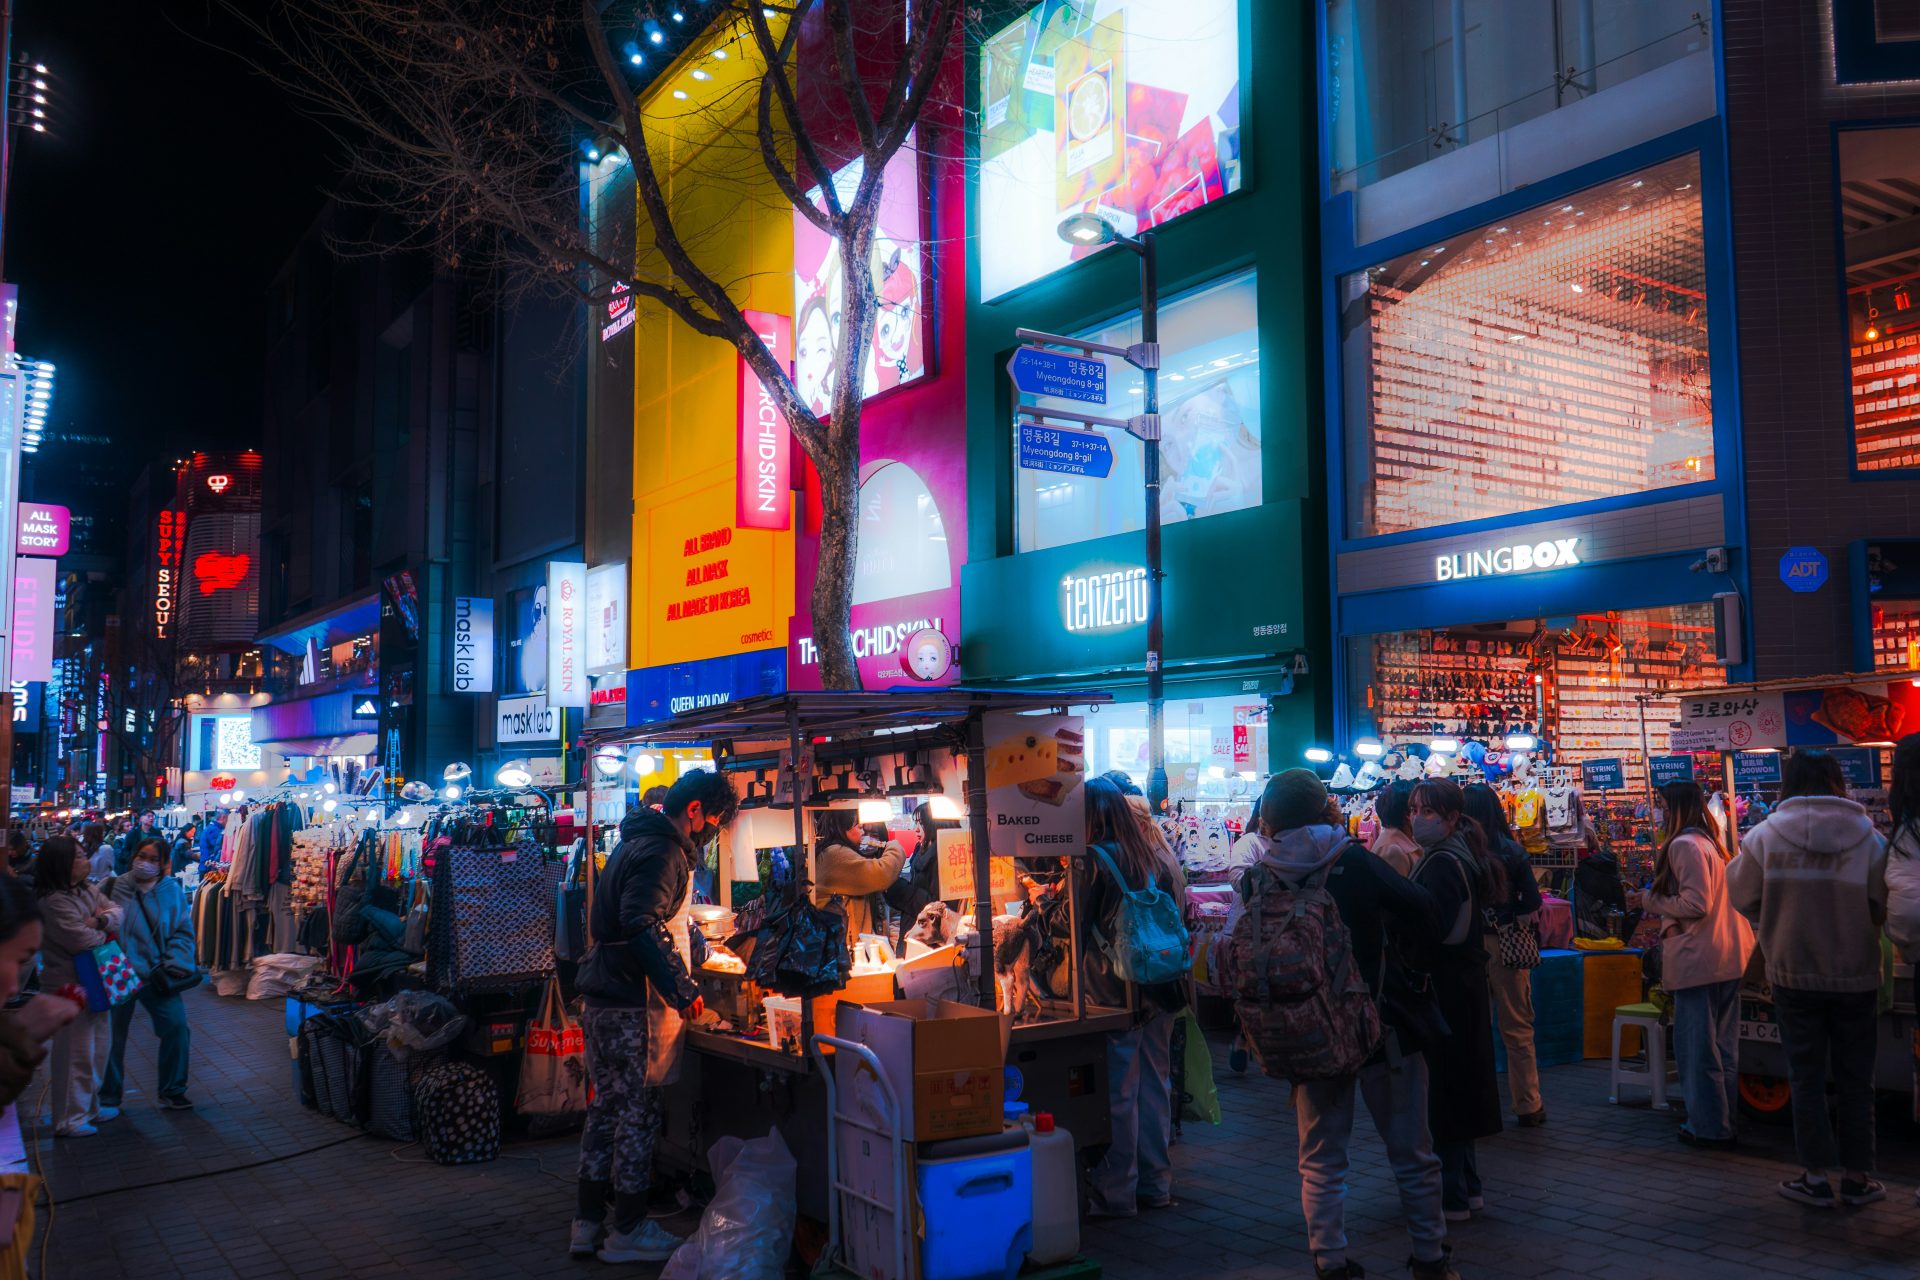 <p>There are many restaurants and cafes, and in the evening, many Korean B-class gourmet food stalls appear on the main street.</p> <p>Image: Nathan Park / Unsplash</p>